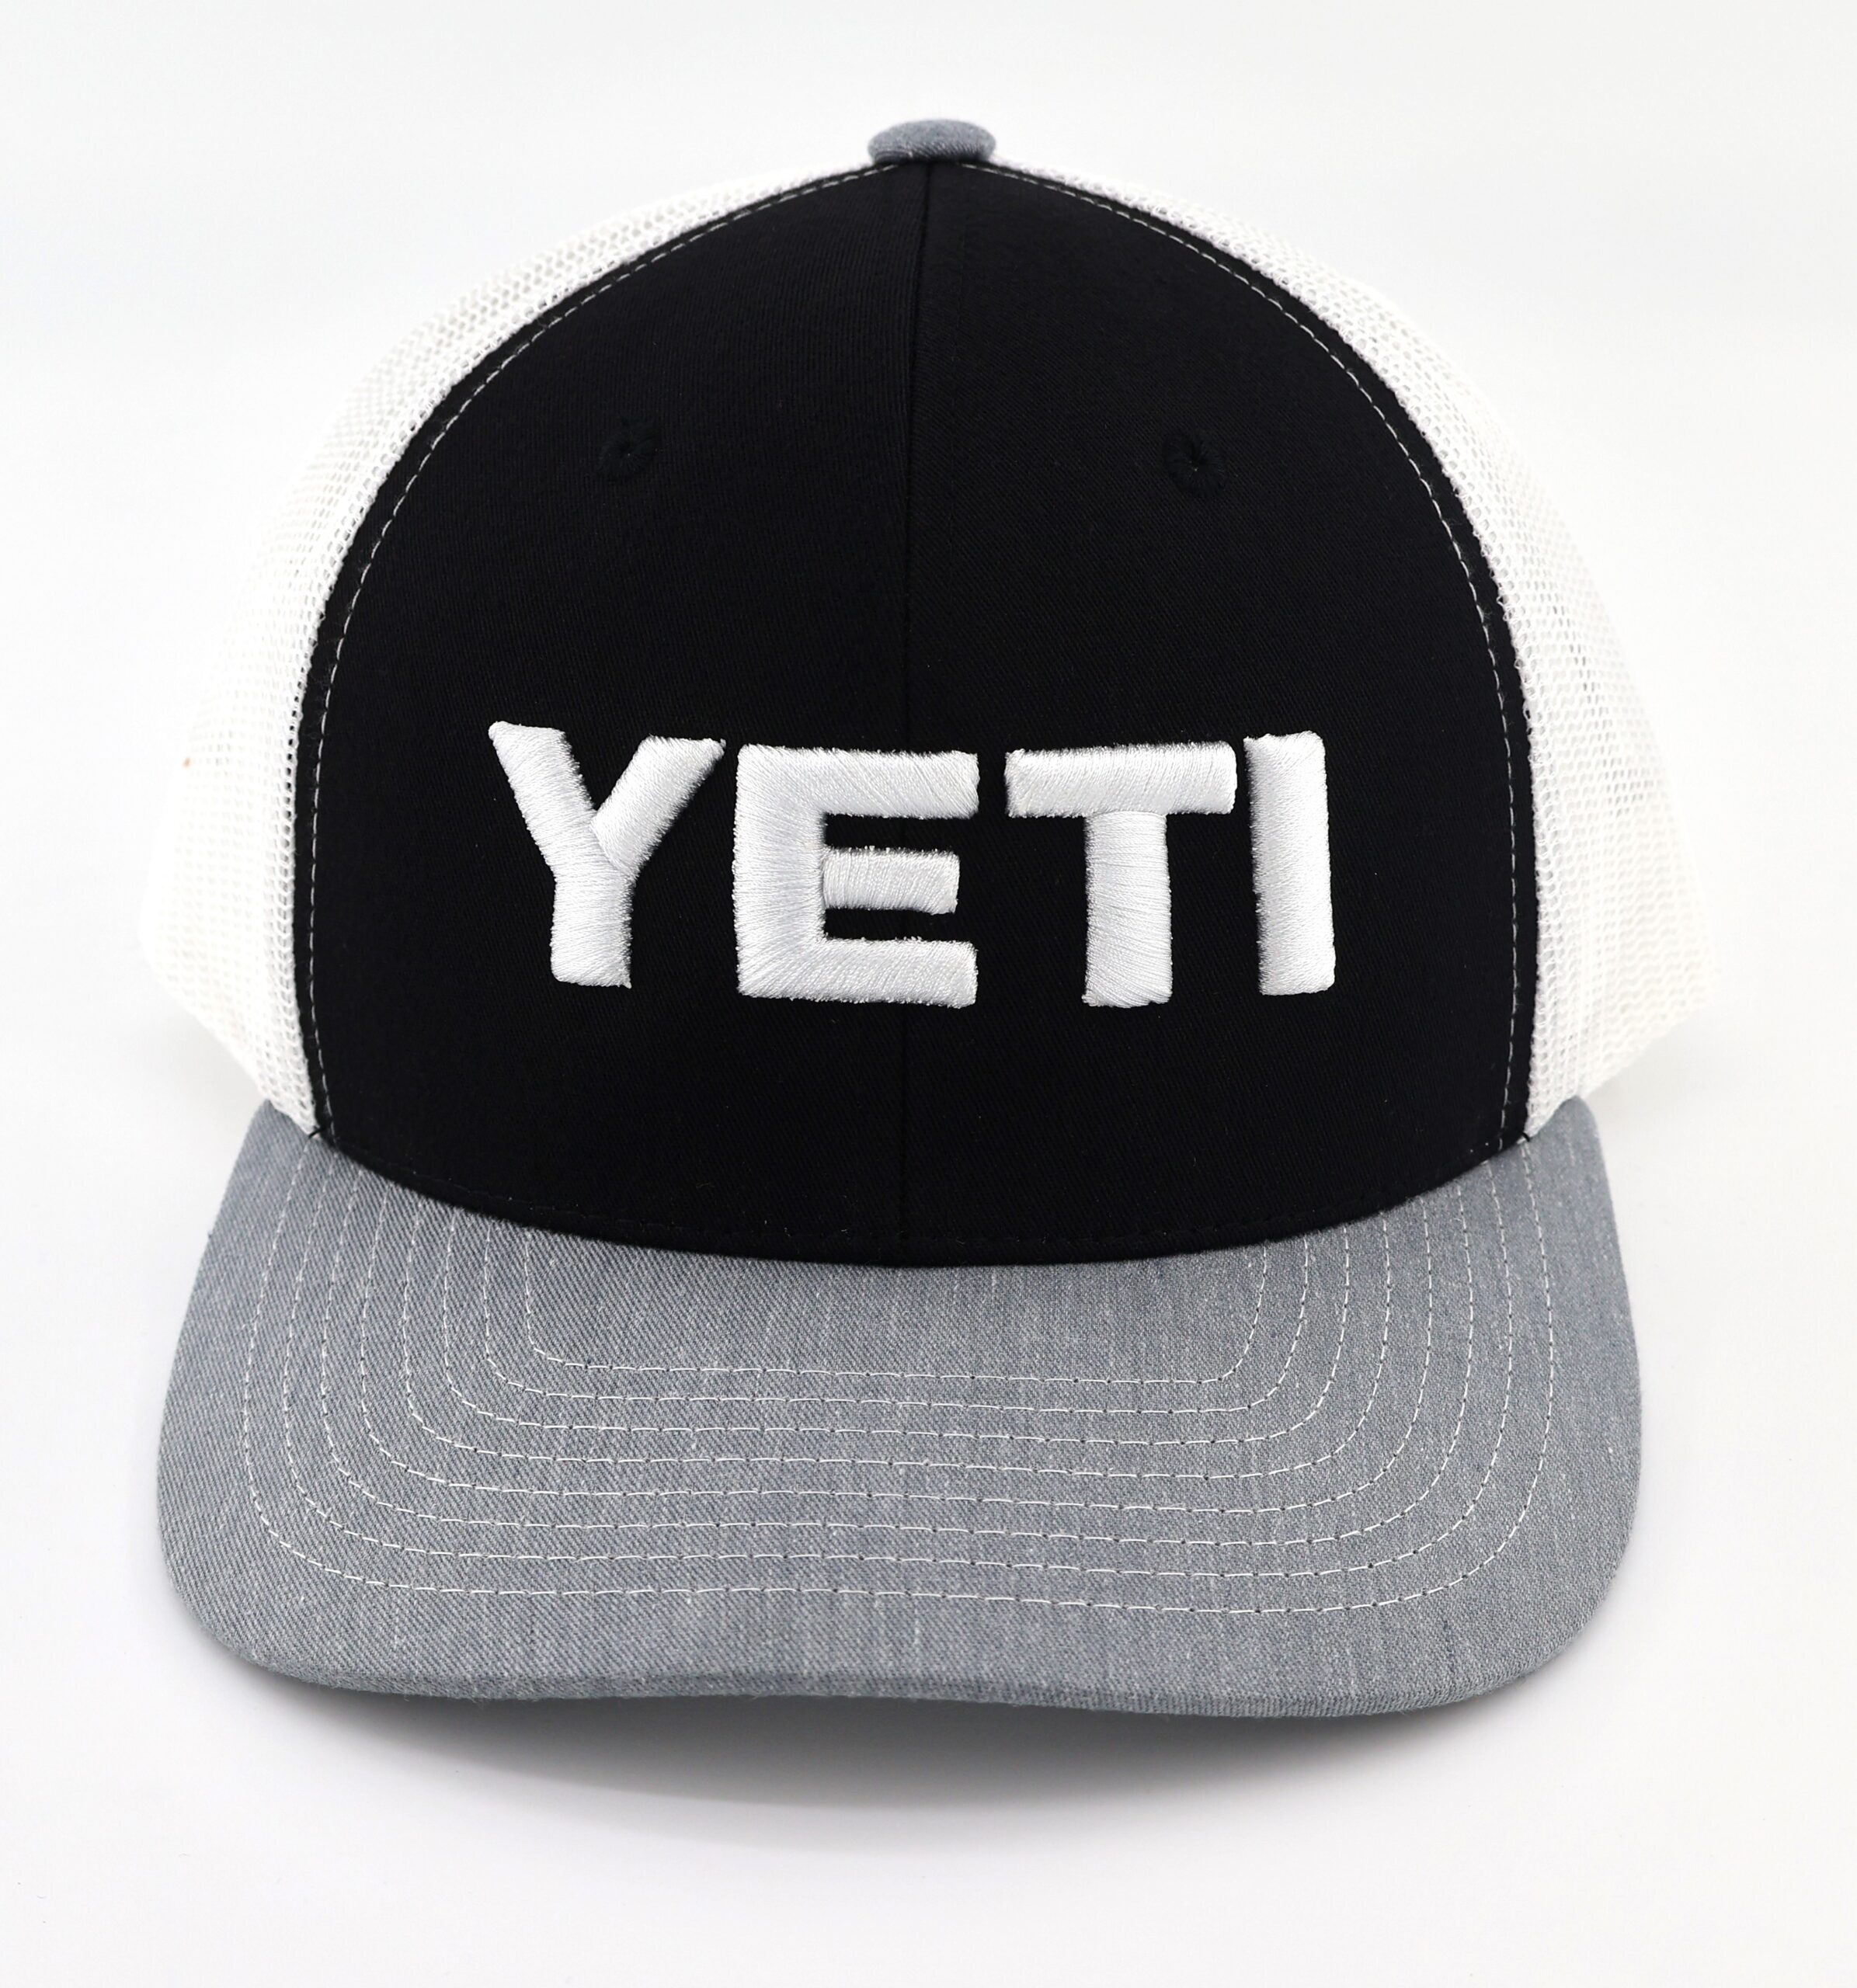 yeti embroidered 3d puff cap